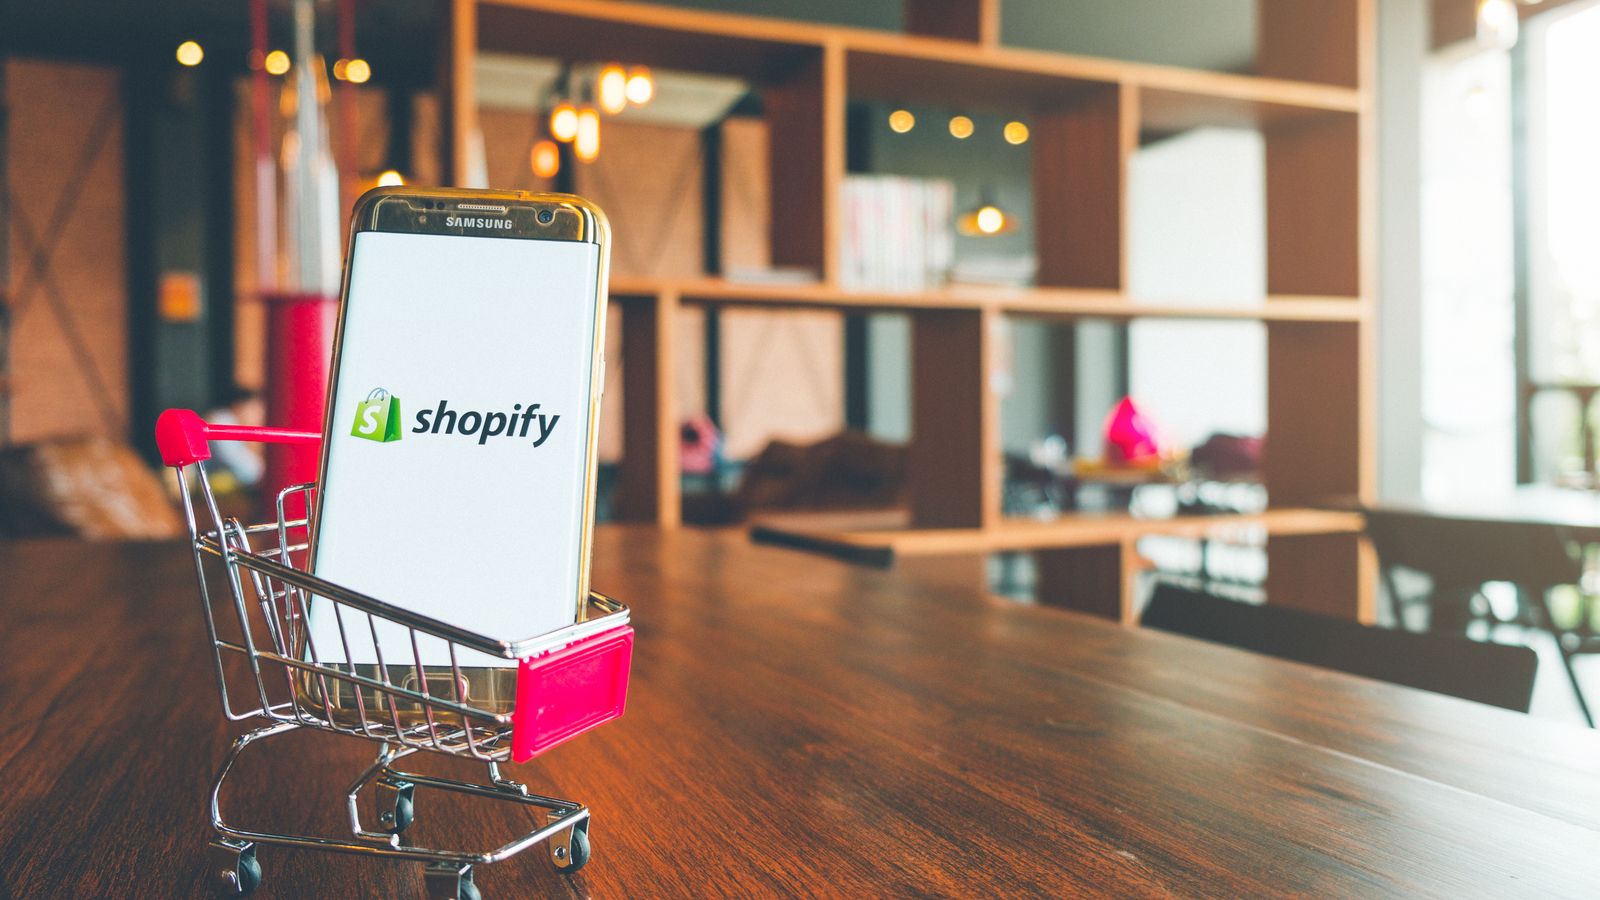 Image of a shopping cart toy on a wooden desk carrying a mobile phone that features the Shopy (SHOP) logo on it